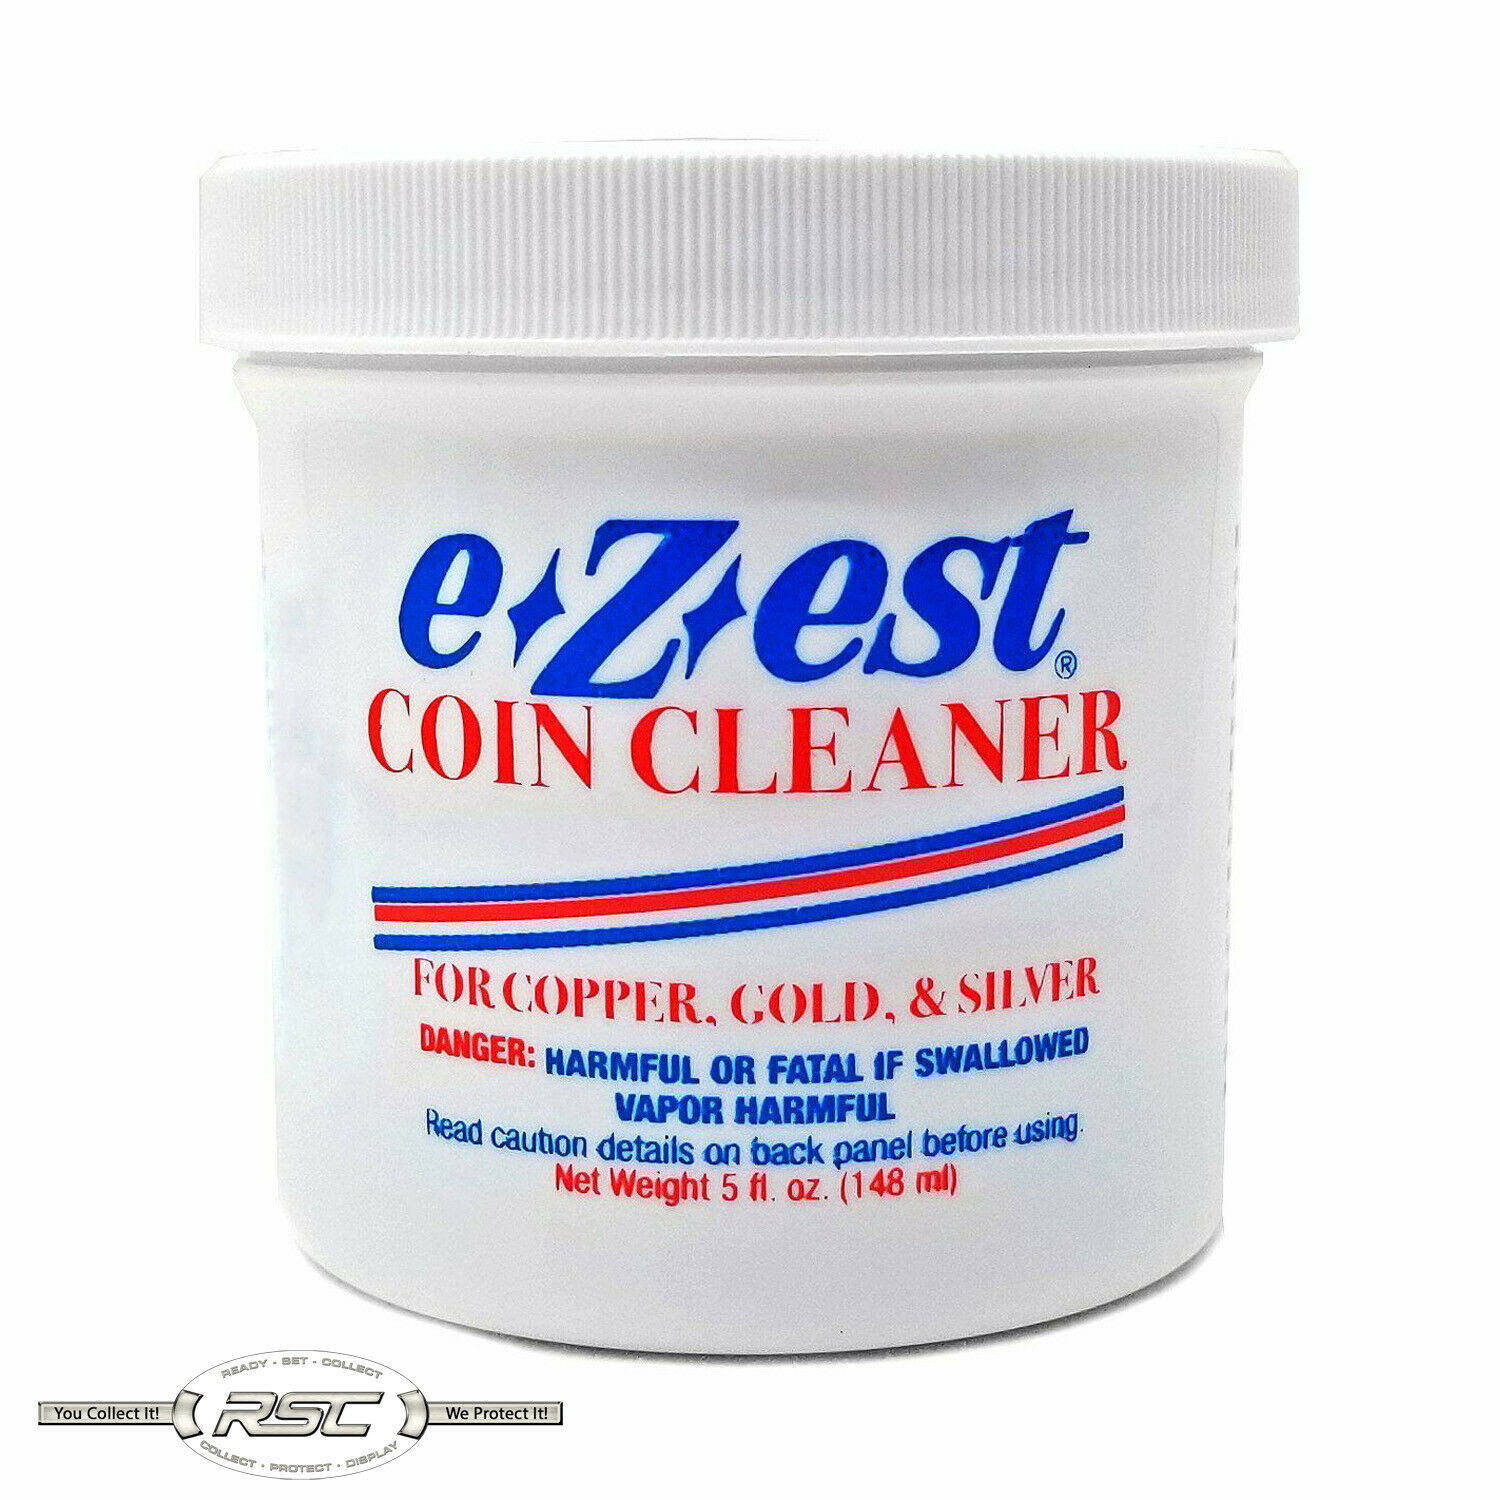 1- E-Z-Est (eZest) 5-Ounce Coin Cleaner Jar for Silver Gold & Copper Jewelry